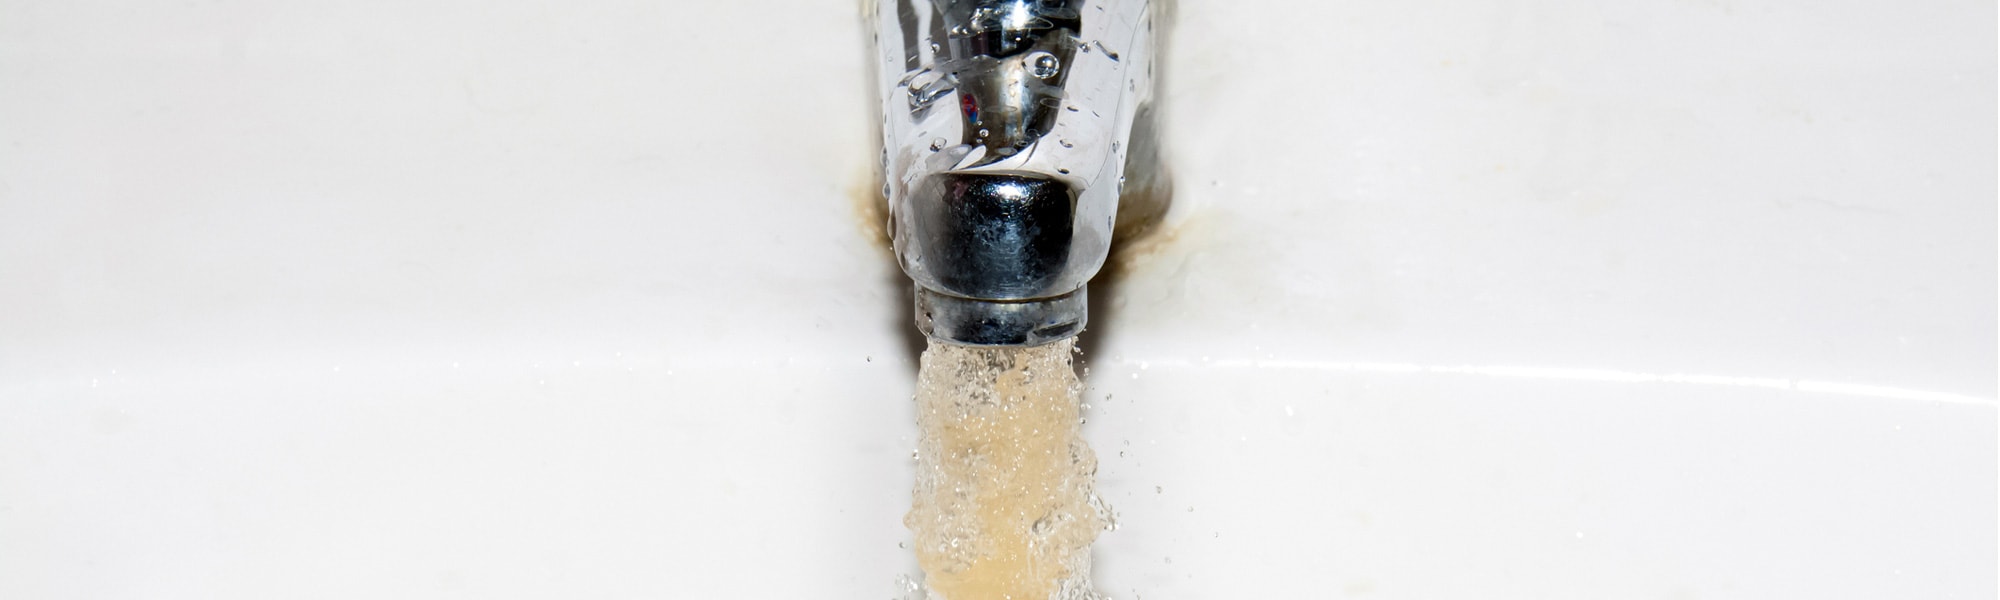 Image banner of dirty water coming out of a sink faucet